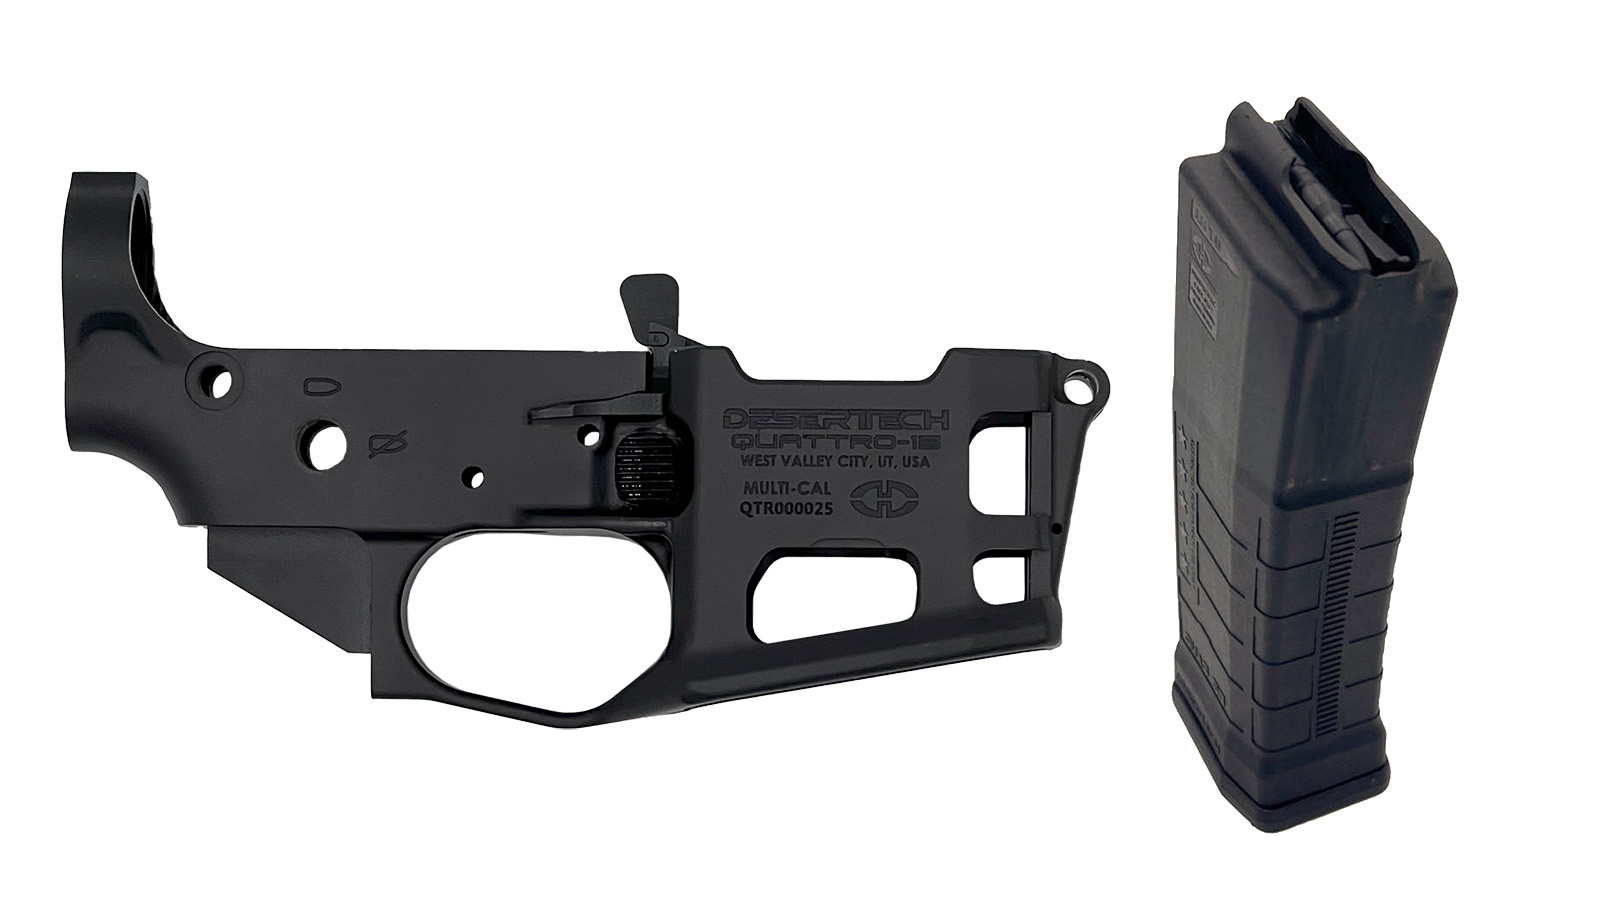 Quattro-15 Lower Receiver Assembly with QMAG-53 556NATO 223Rem 53rd